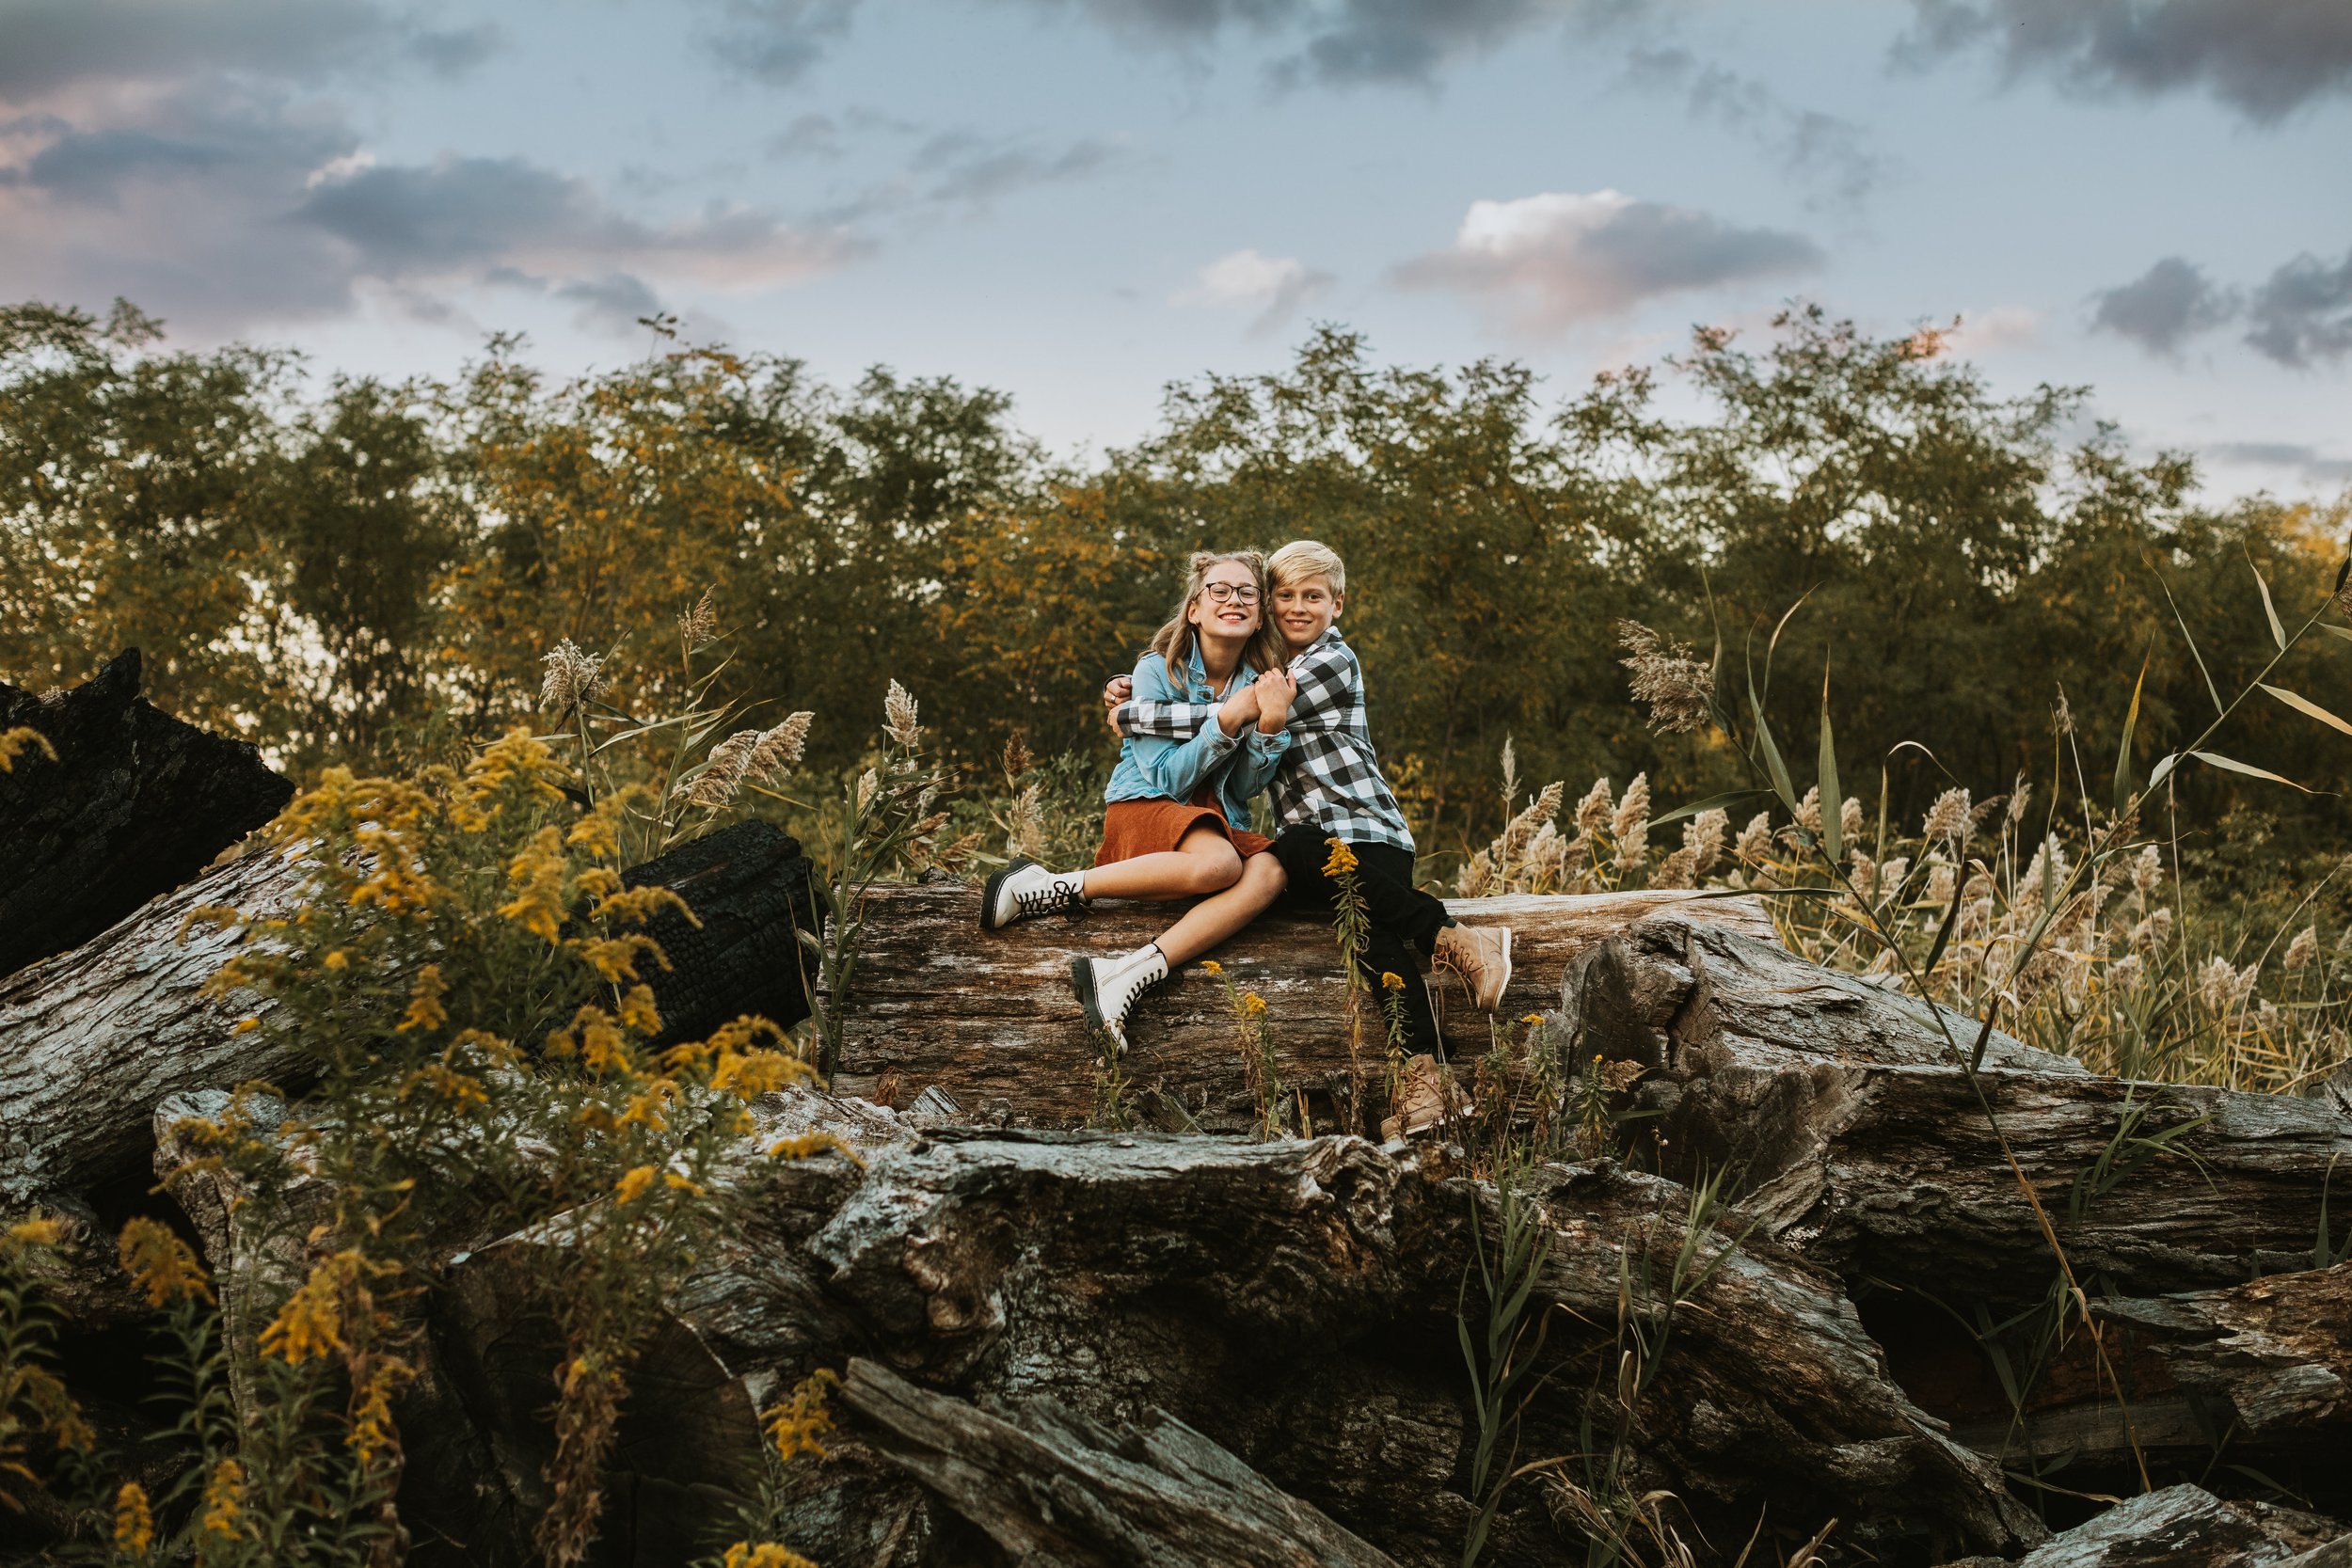  In the Illinois Valley, a brother and sister hug while sitting on a rock captured by Teala Ward Photography. hugging #TealaWardPhotography #TealaWardFamilies #IllinoisValleyfamilypics #fursibiling #Illinoisfamilyphotography #brother&amp;sister 